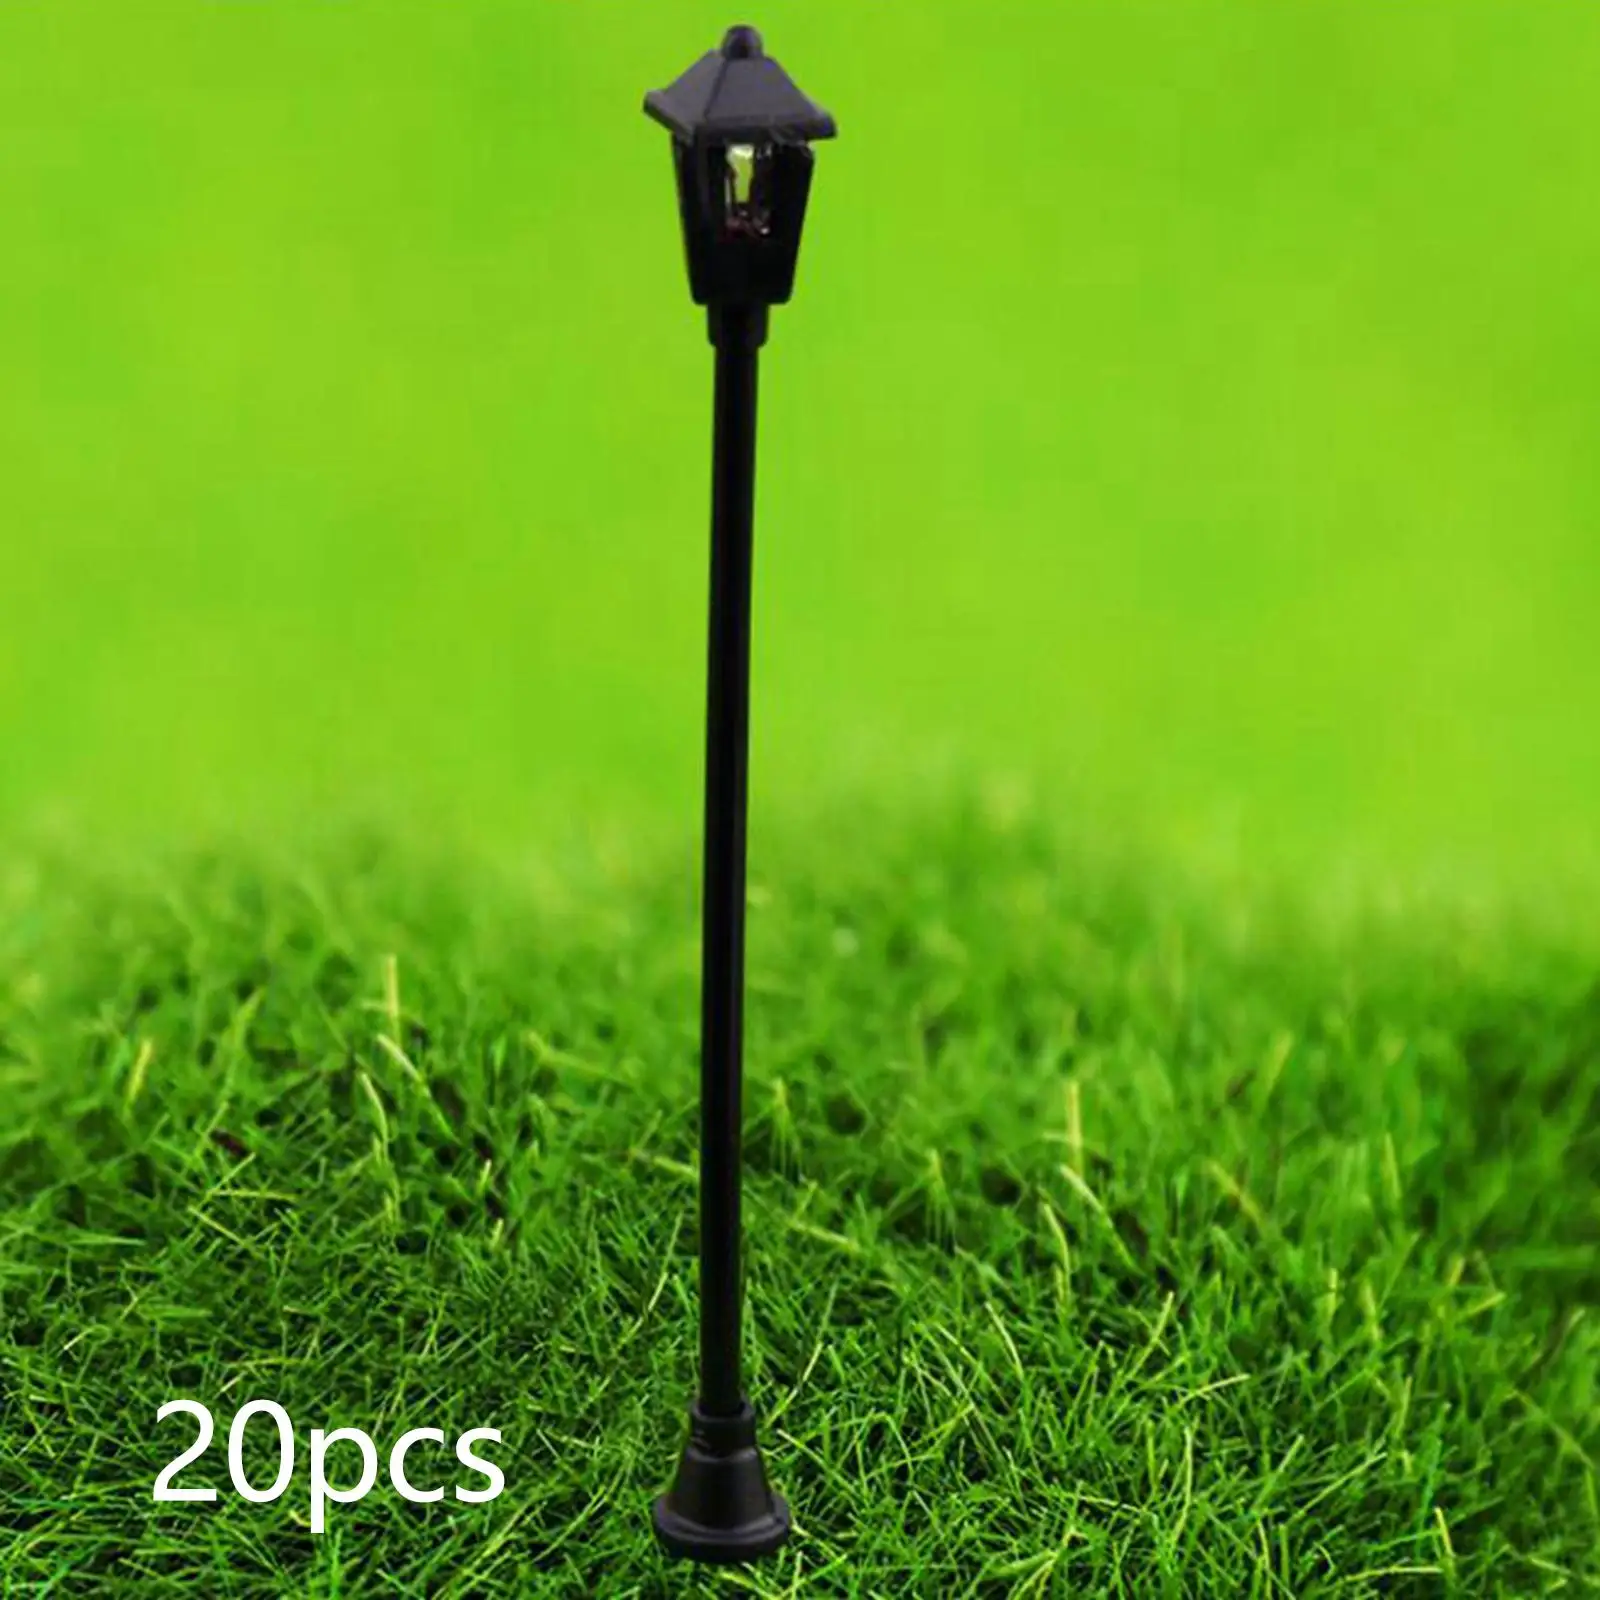 20x Model Train Lamp Lighted Street Lamps DIY Projects Dollhouse Decoration